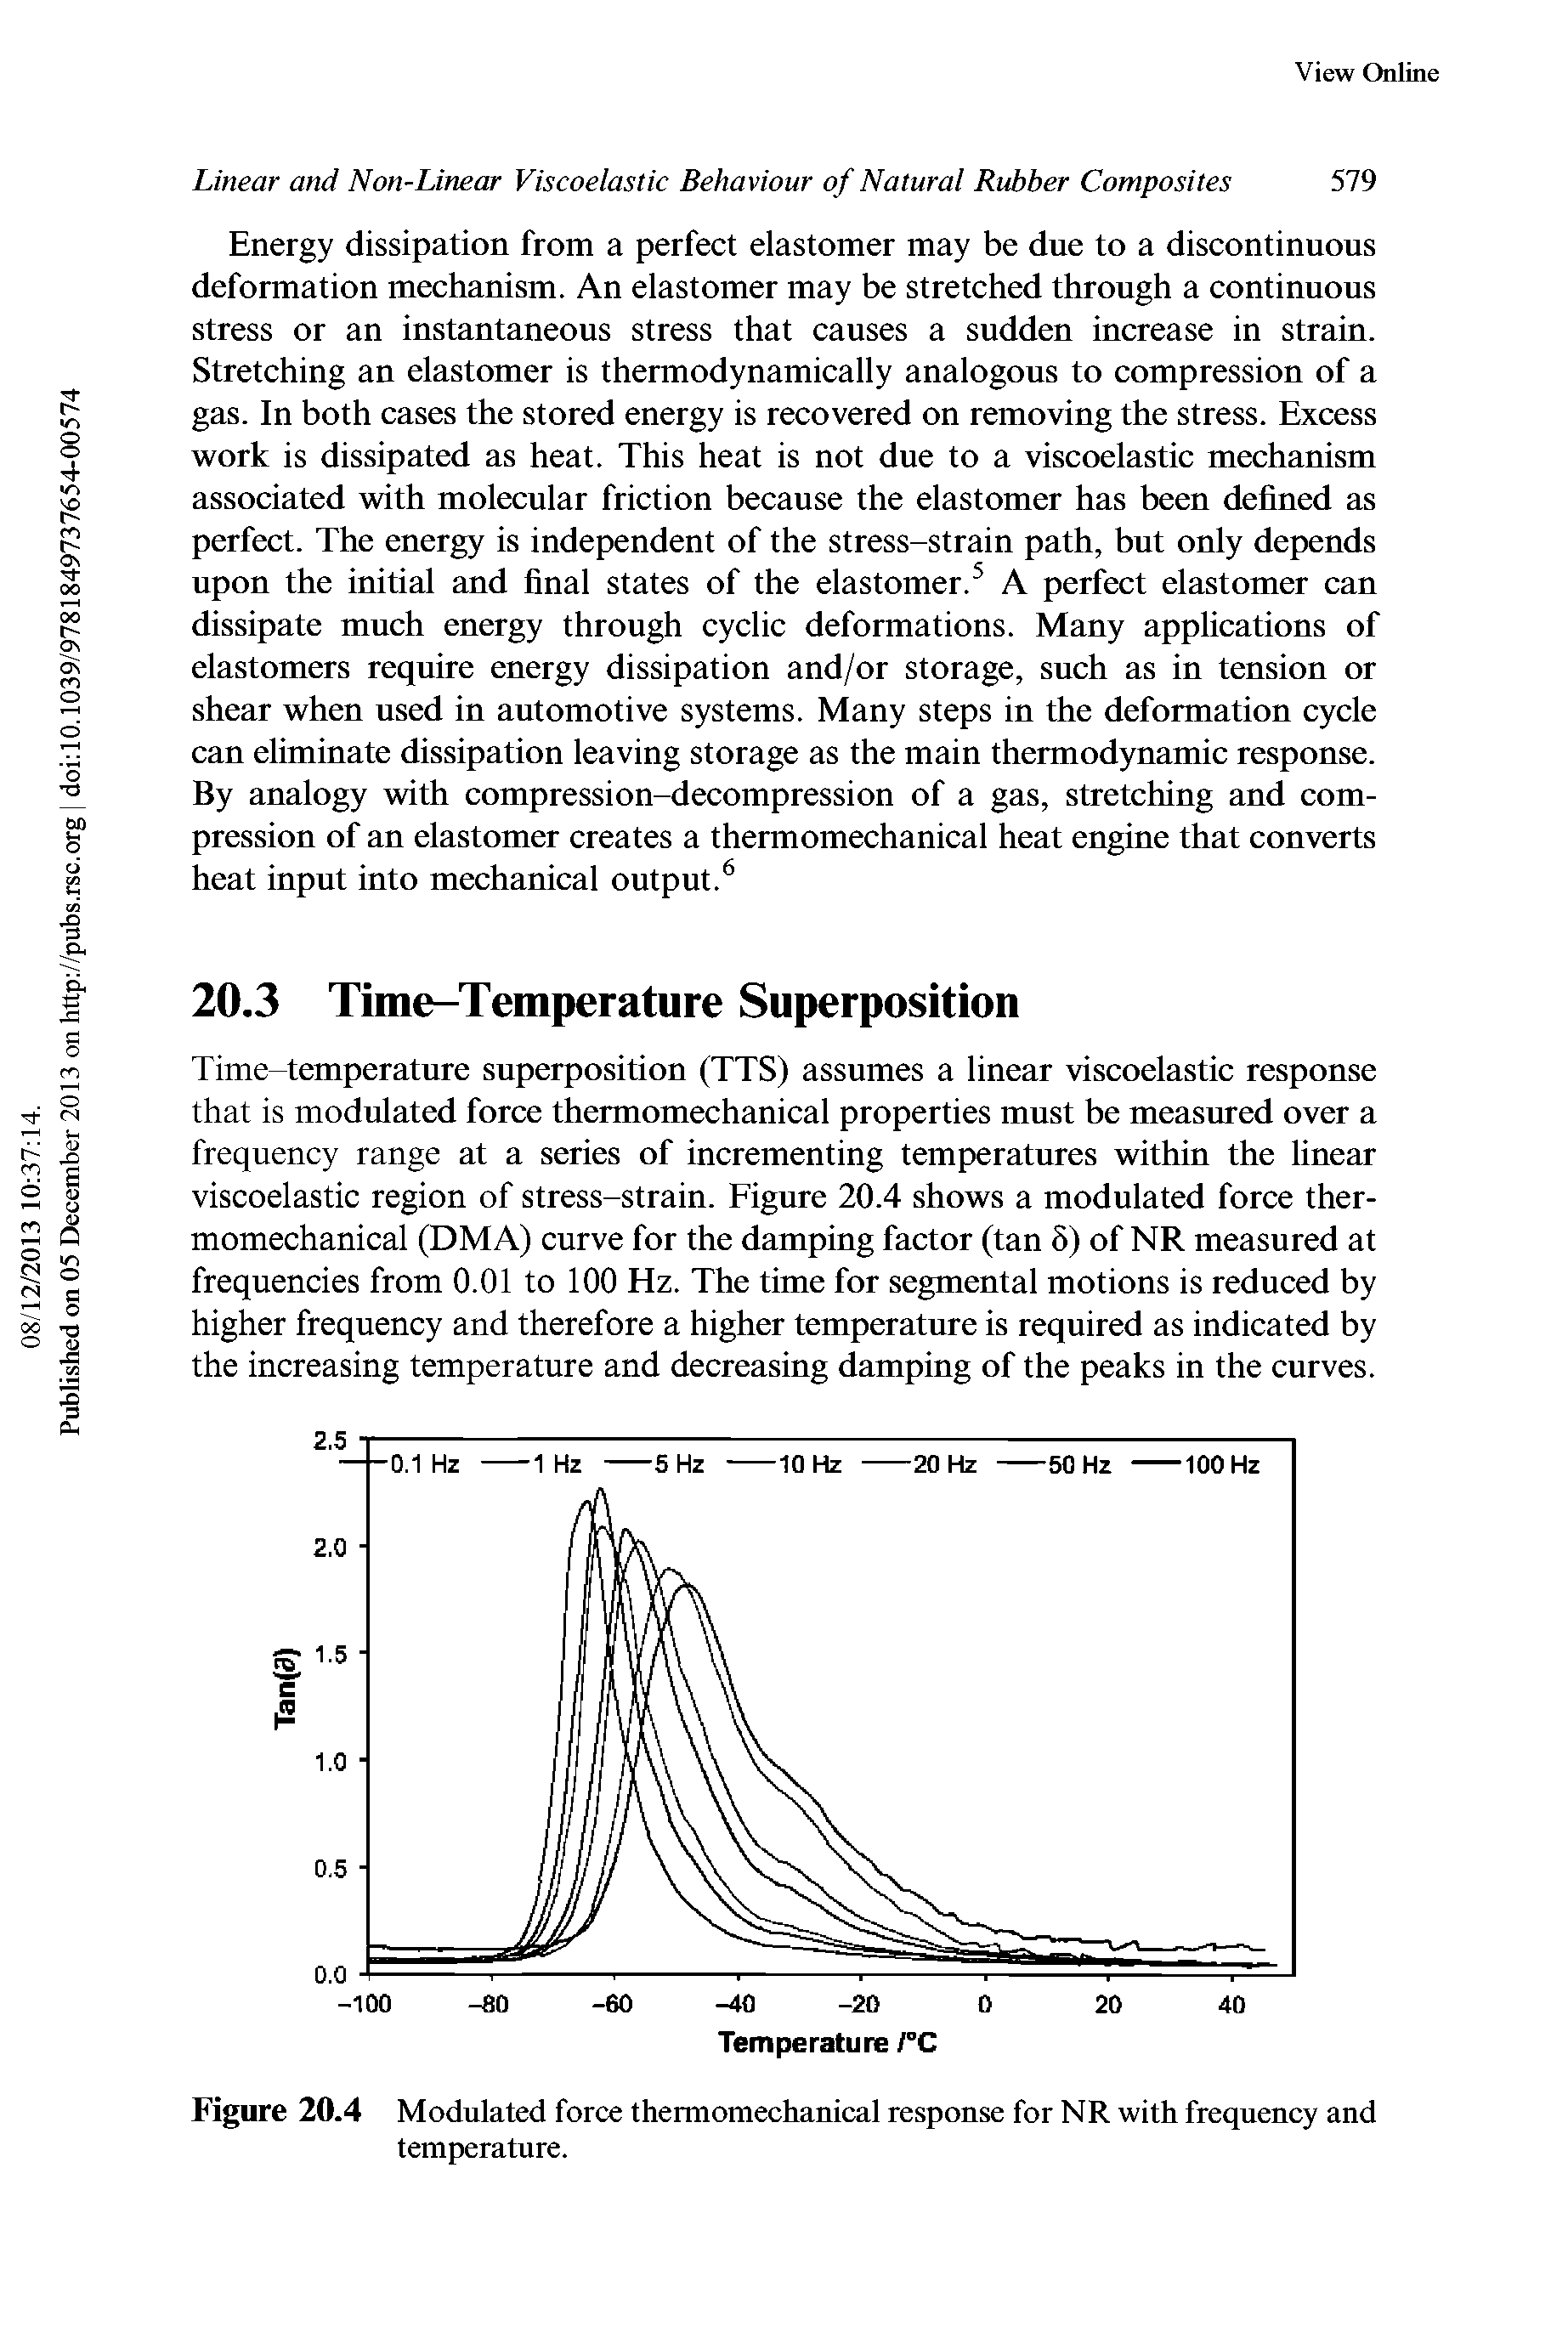 Figure 20.4 Modulated force thermomechanical response for NR with frequency and temperature.